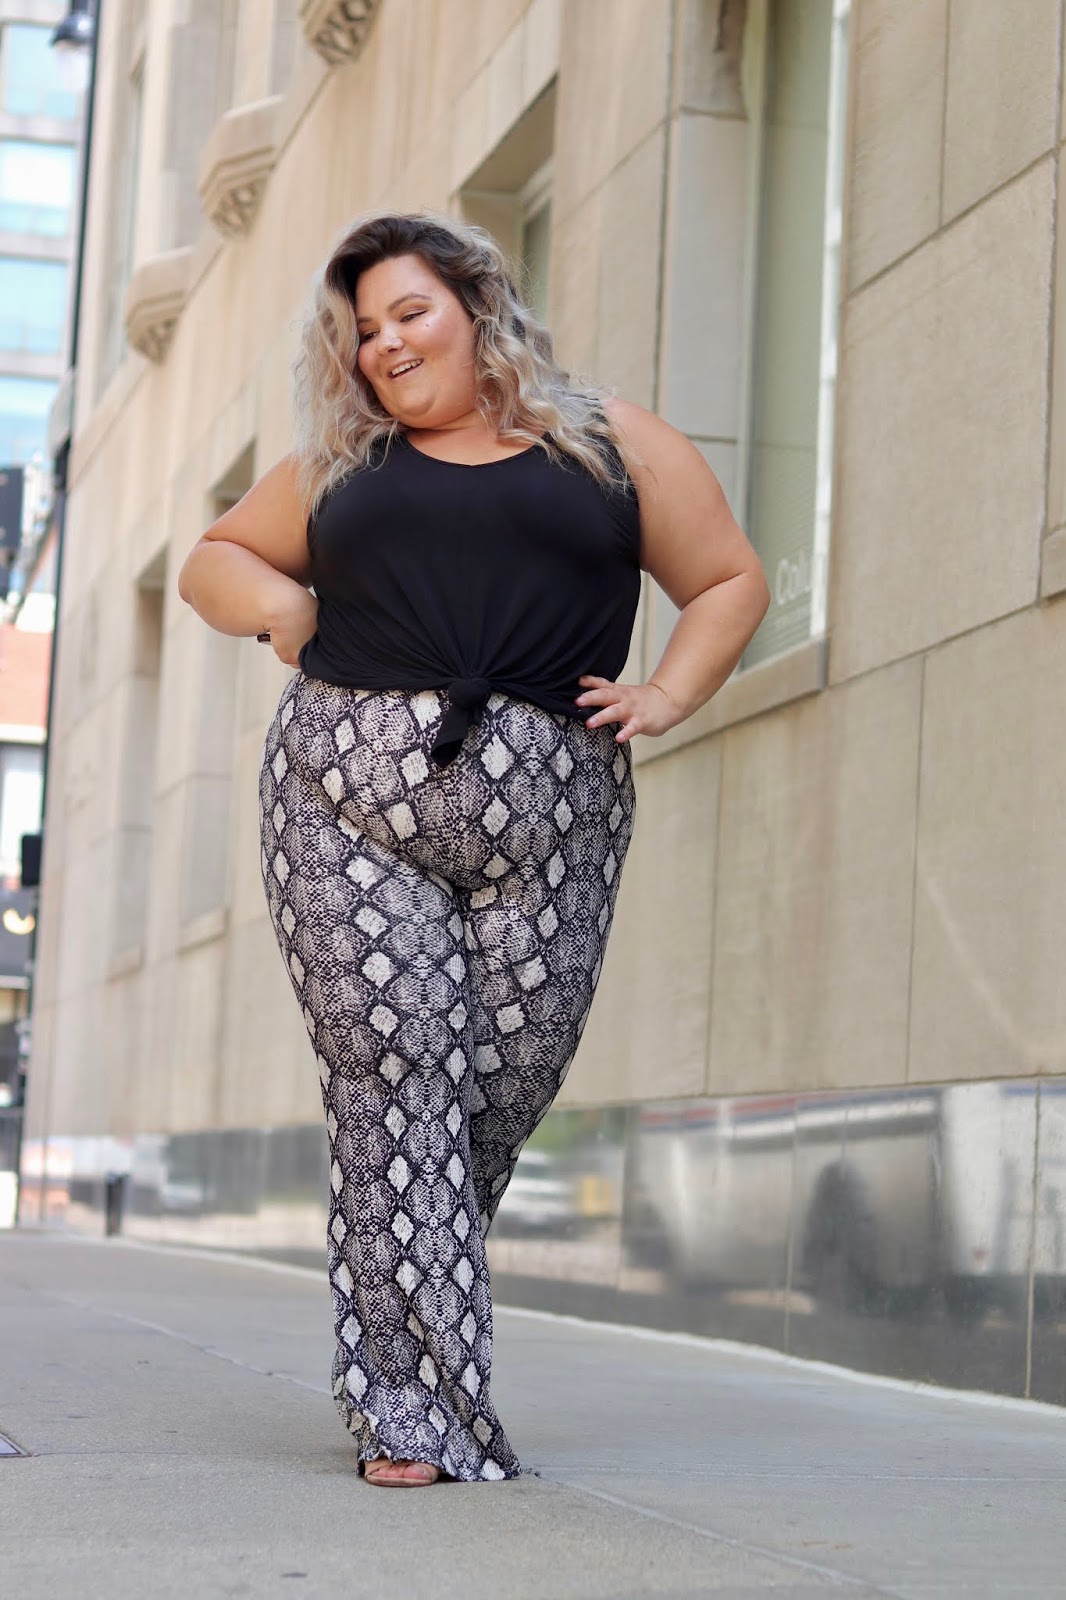 Chicago Plus Size Petite Fashion Blogger, influencer, YouTuber, and model Natalie Craig, of Natalie in the City, reviews Chic Soul's snake skin bell bottoms and basic black tank top.